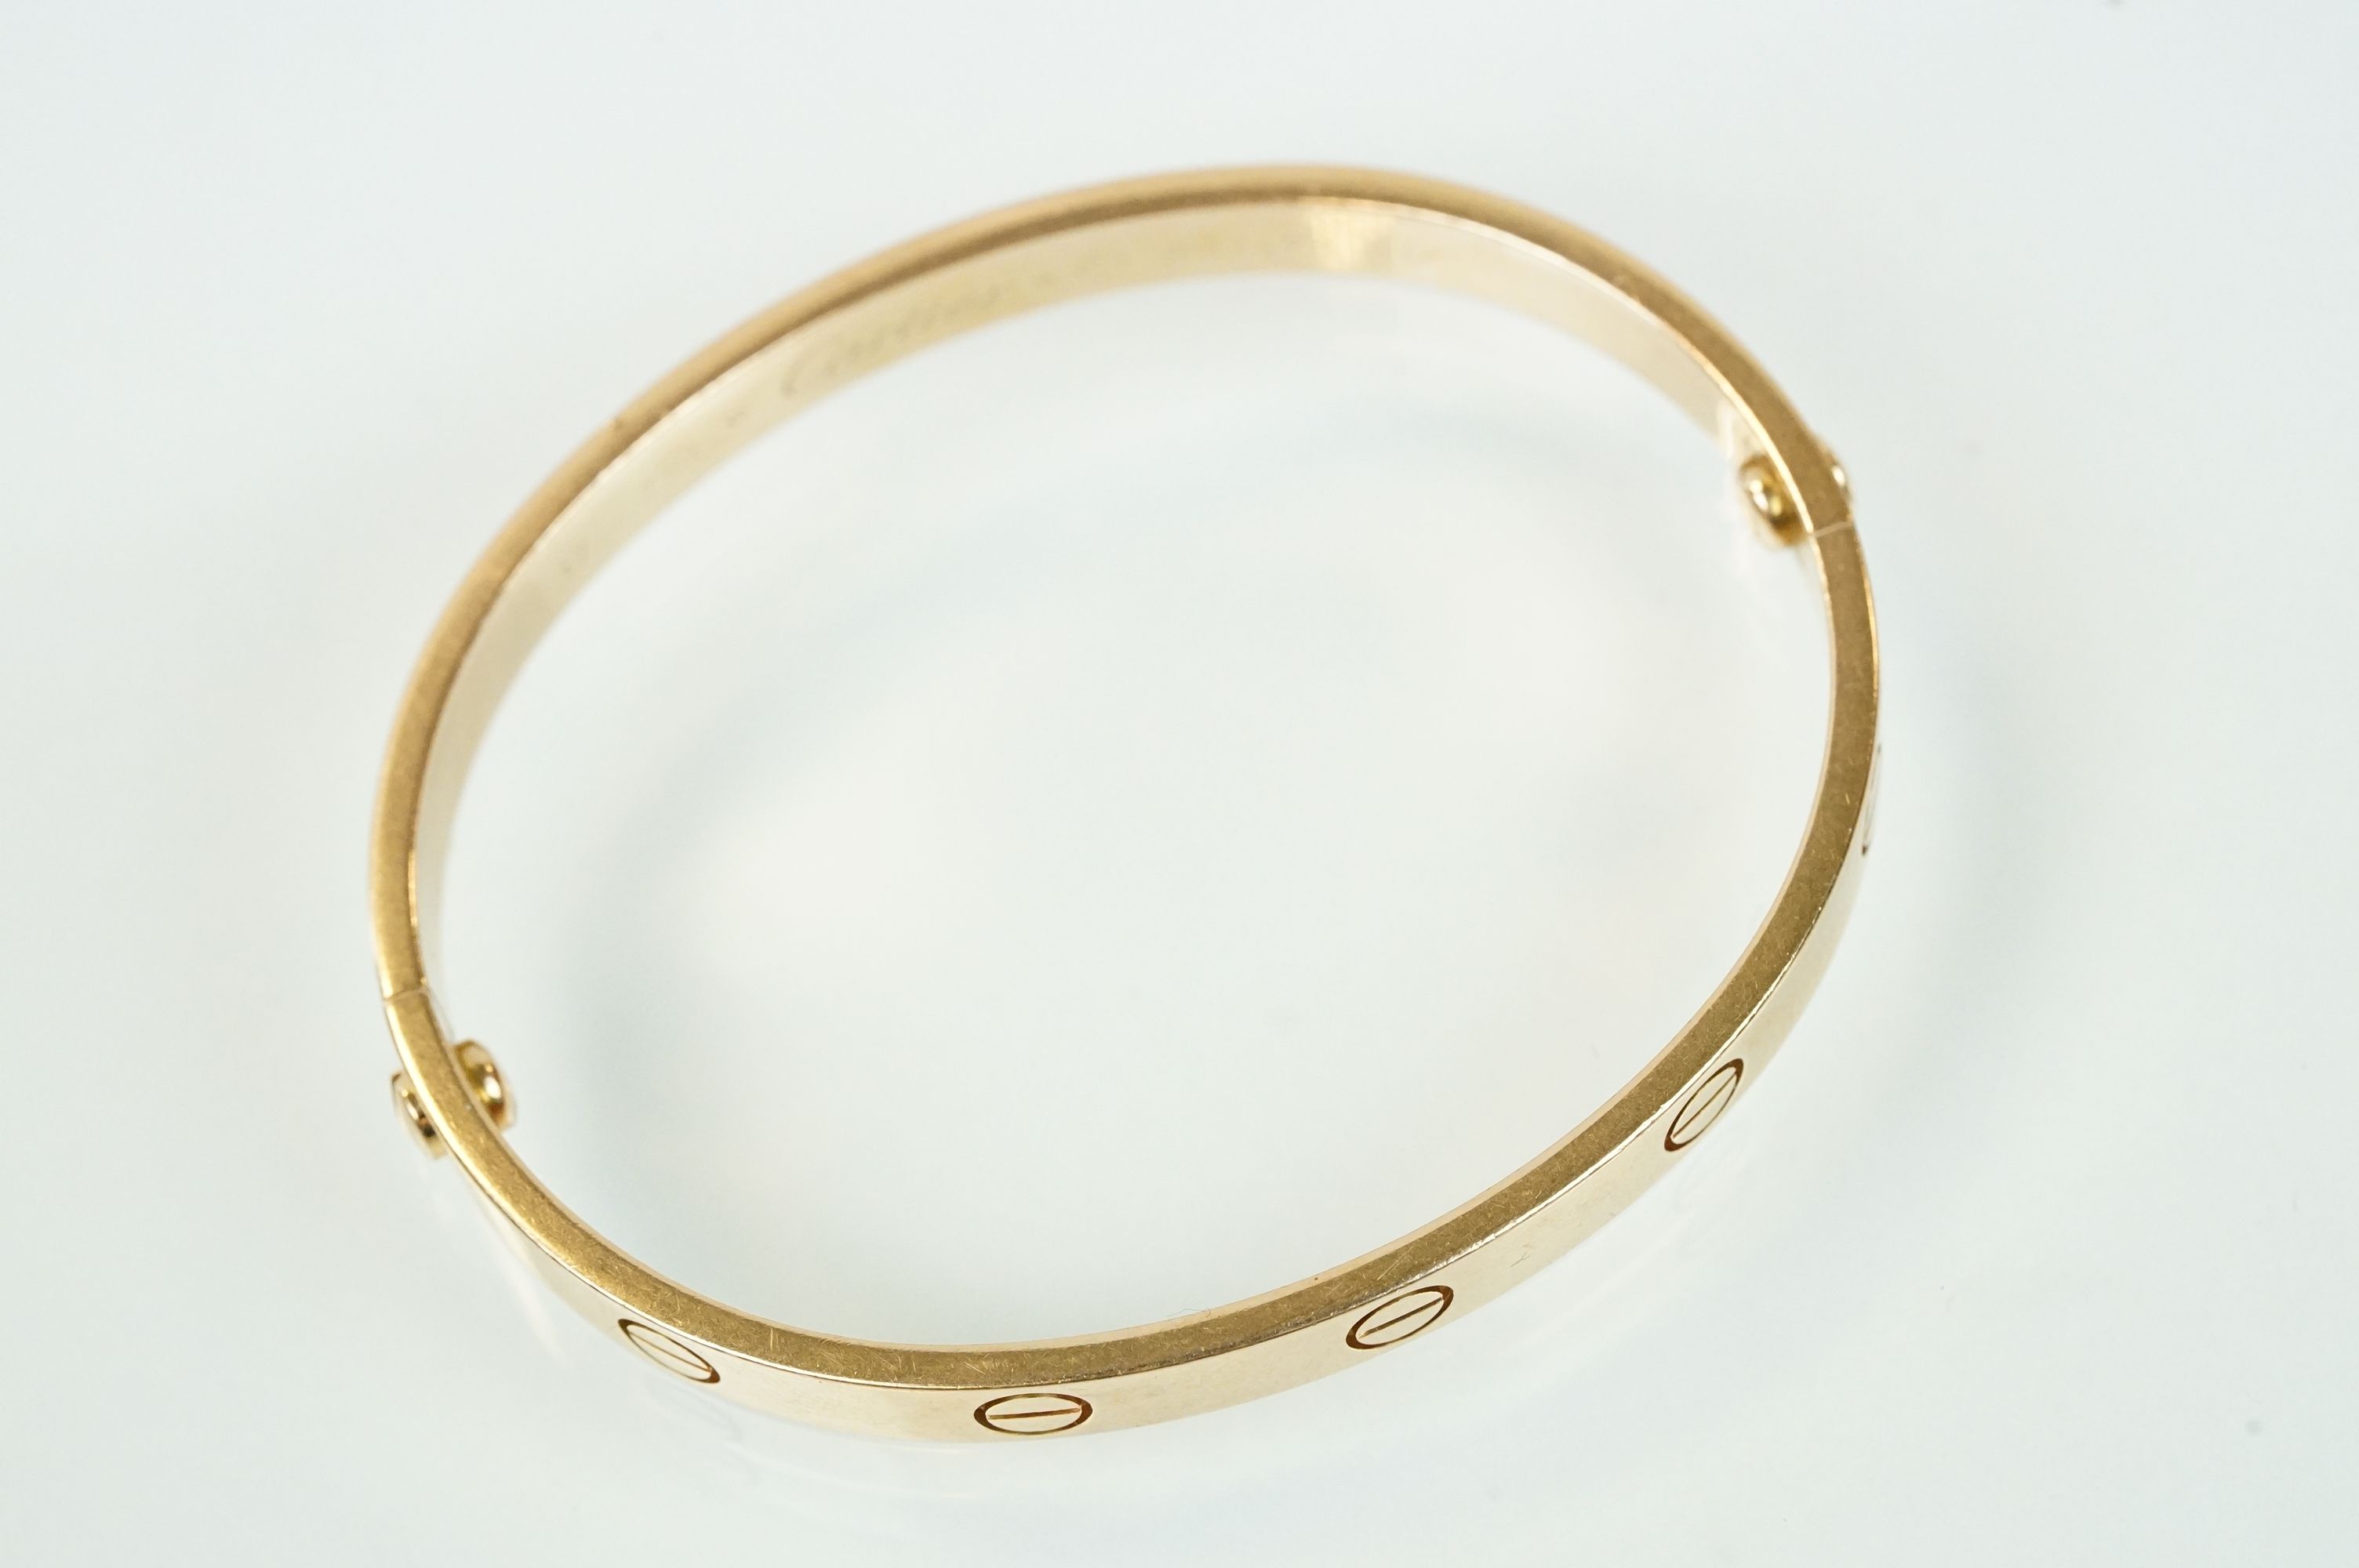 Cartier - 18ct gold 'love' bangle bracelet of oval form with screw detailing. Signed Cartier with - Image 6 of 11